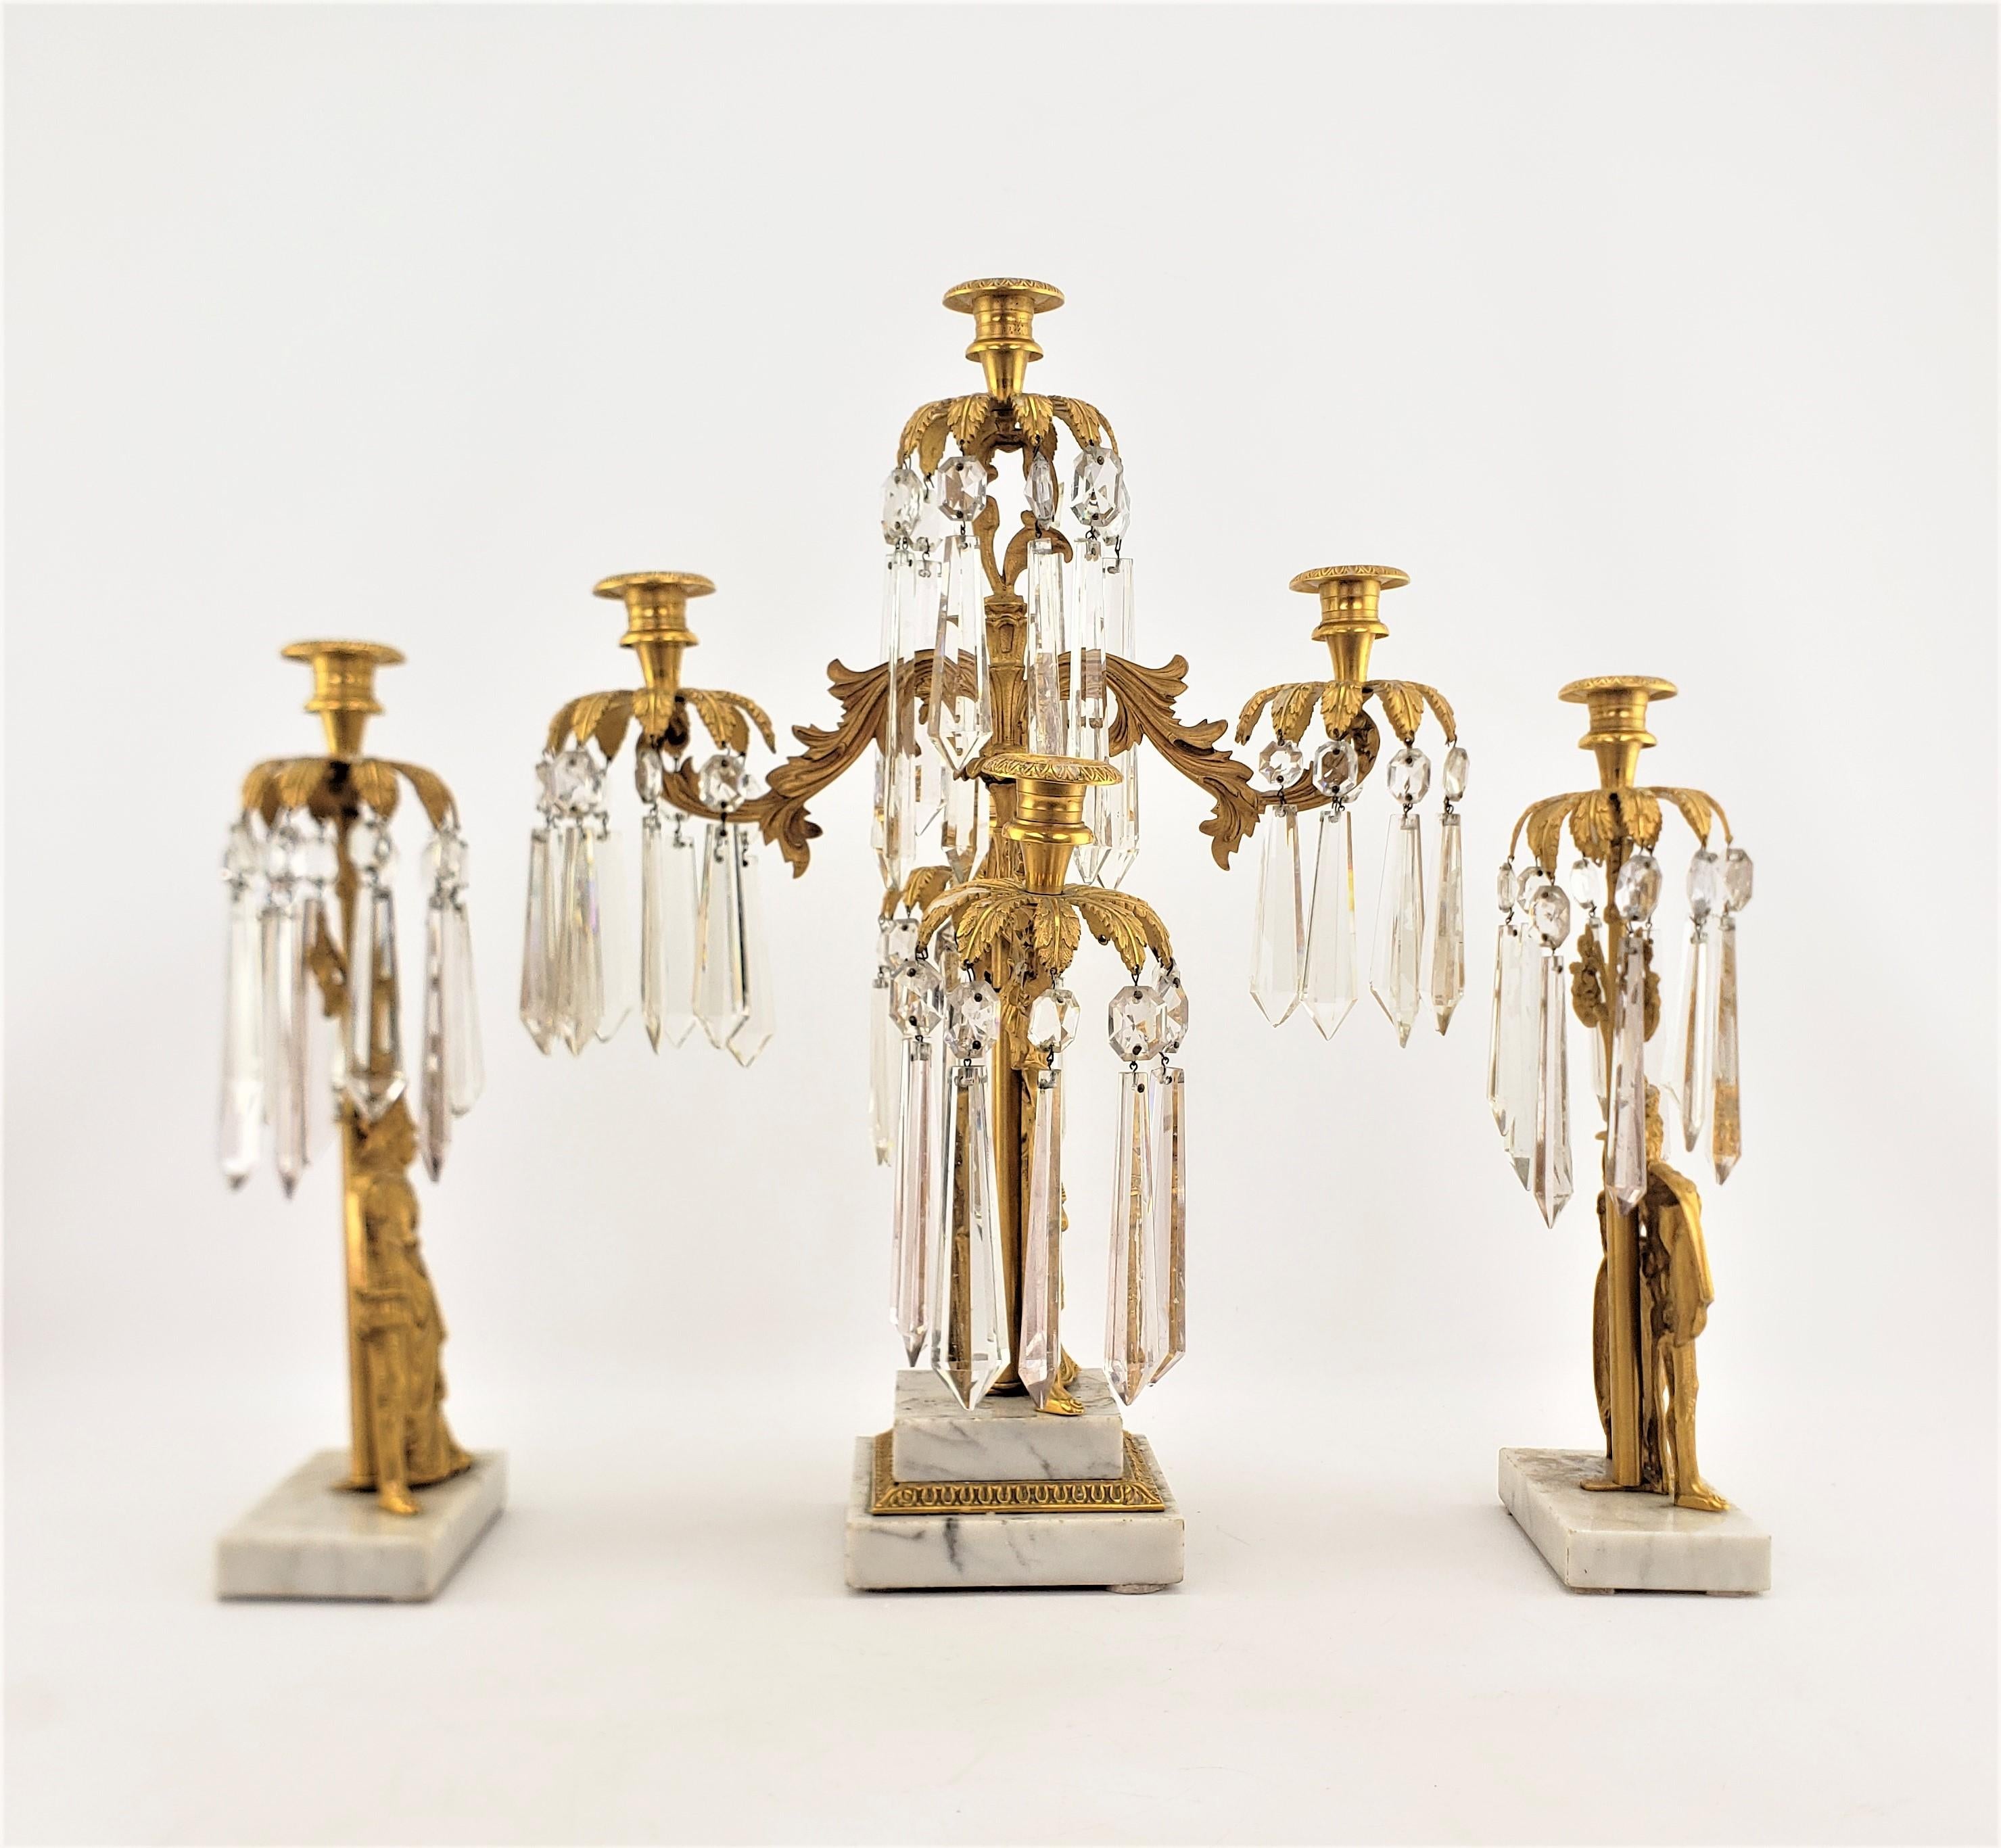 Antique French Gilt Bronze Girandole & Matching Lusters with Cast Noble Figures For Sale 1